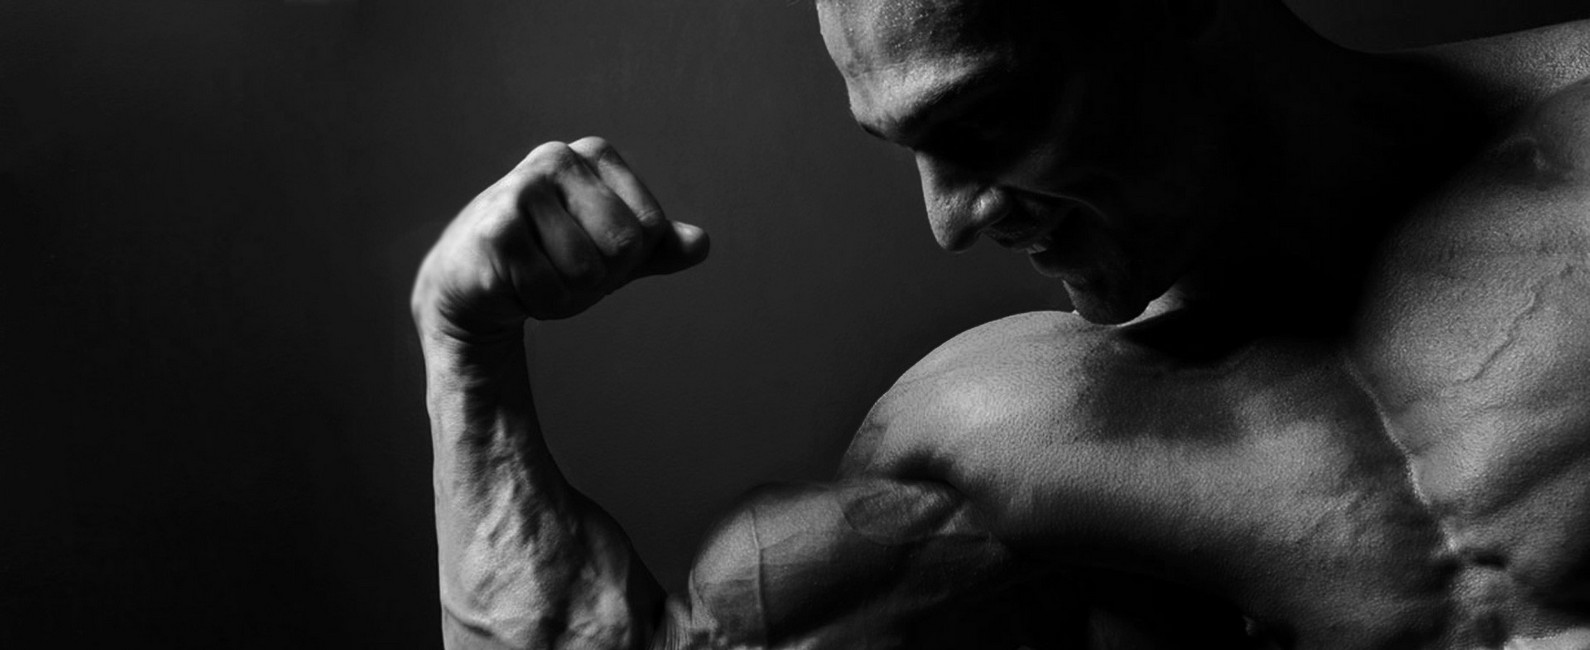 Sarms cycle losing weight